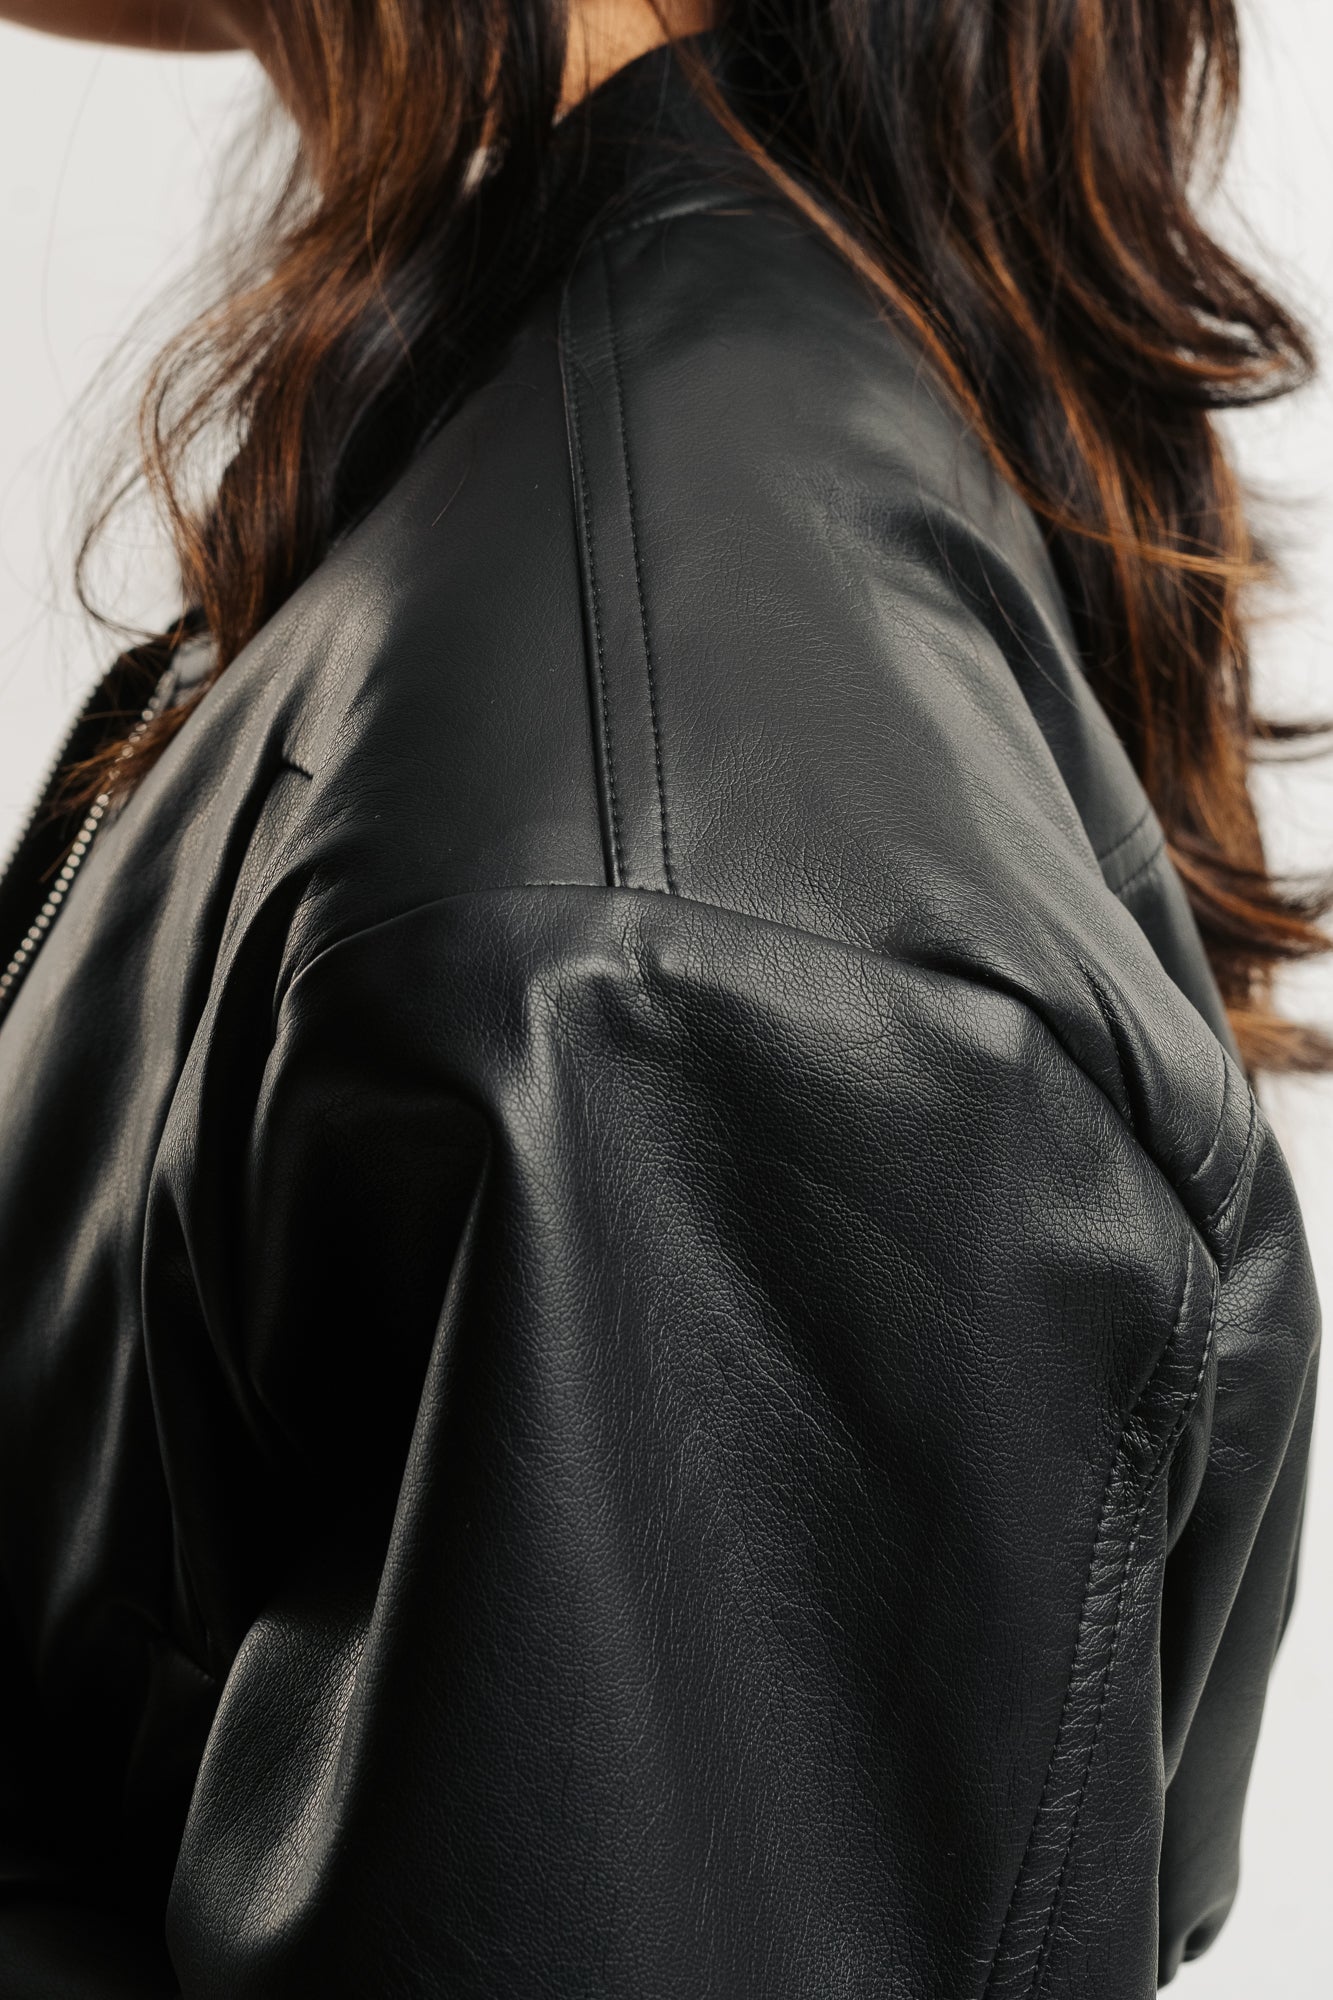 Black Leather Jacket Manufacturer Supplier from Ludhiana India